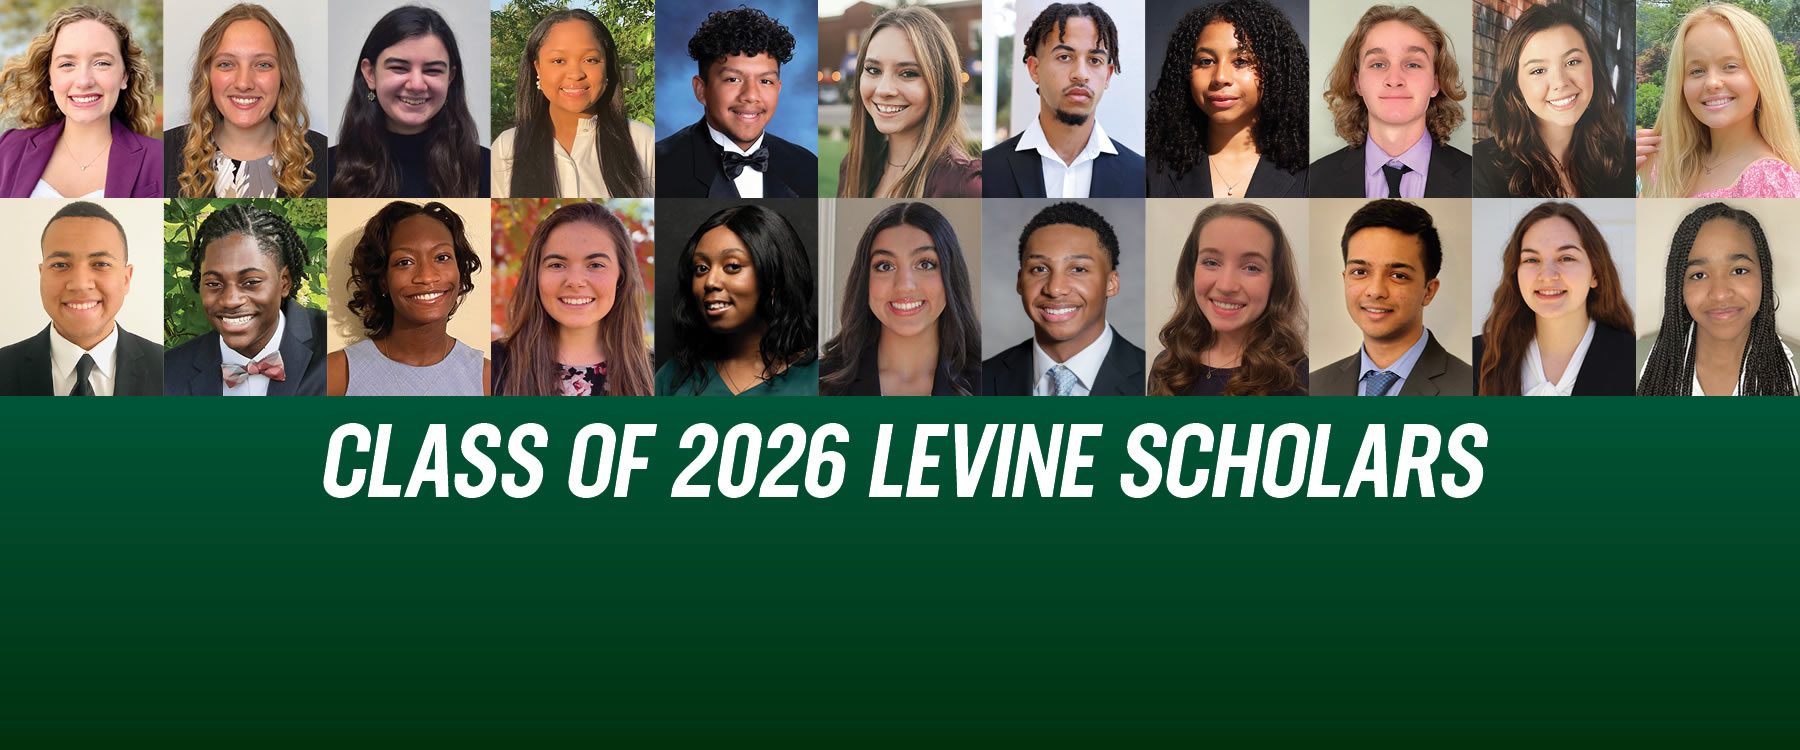 13th class of Levine Scholars to join UNC Charlotte